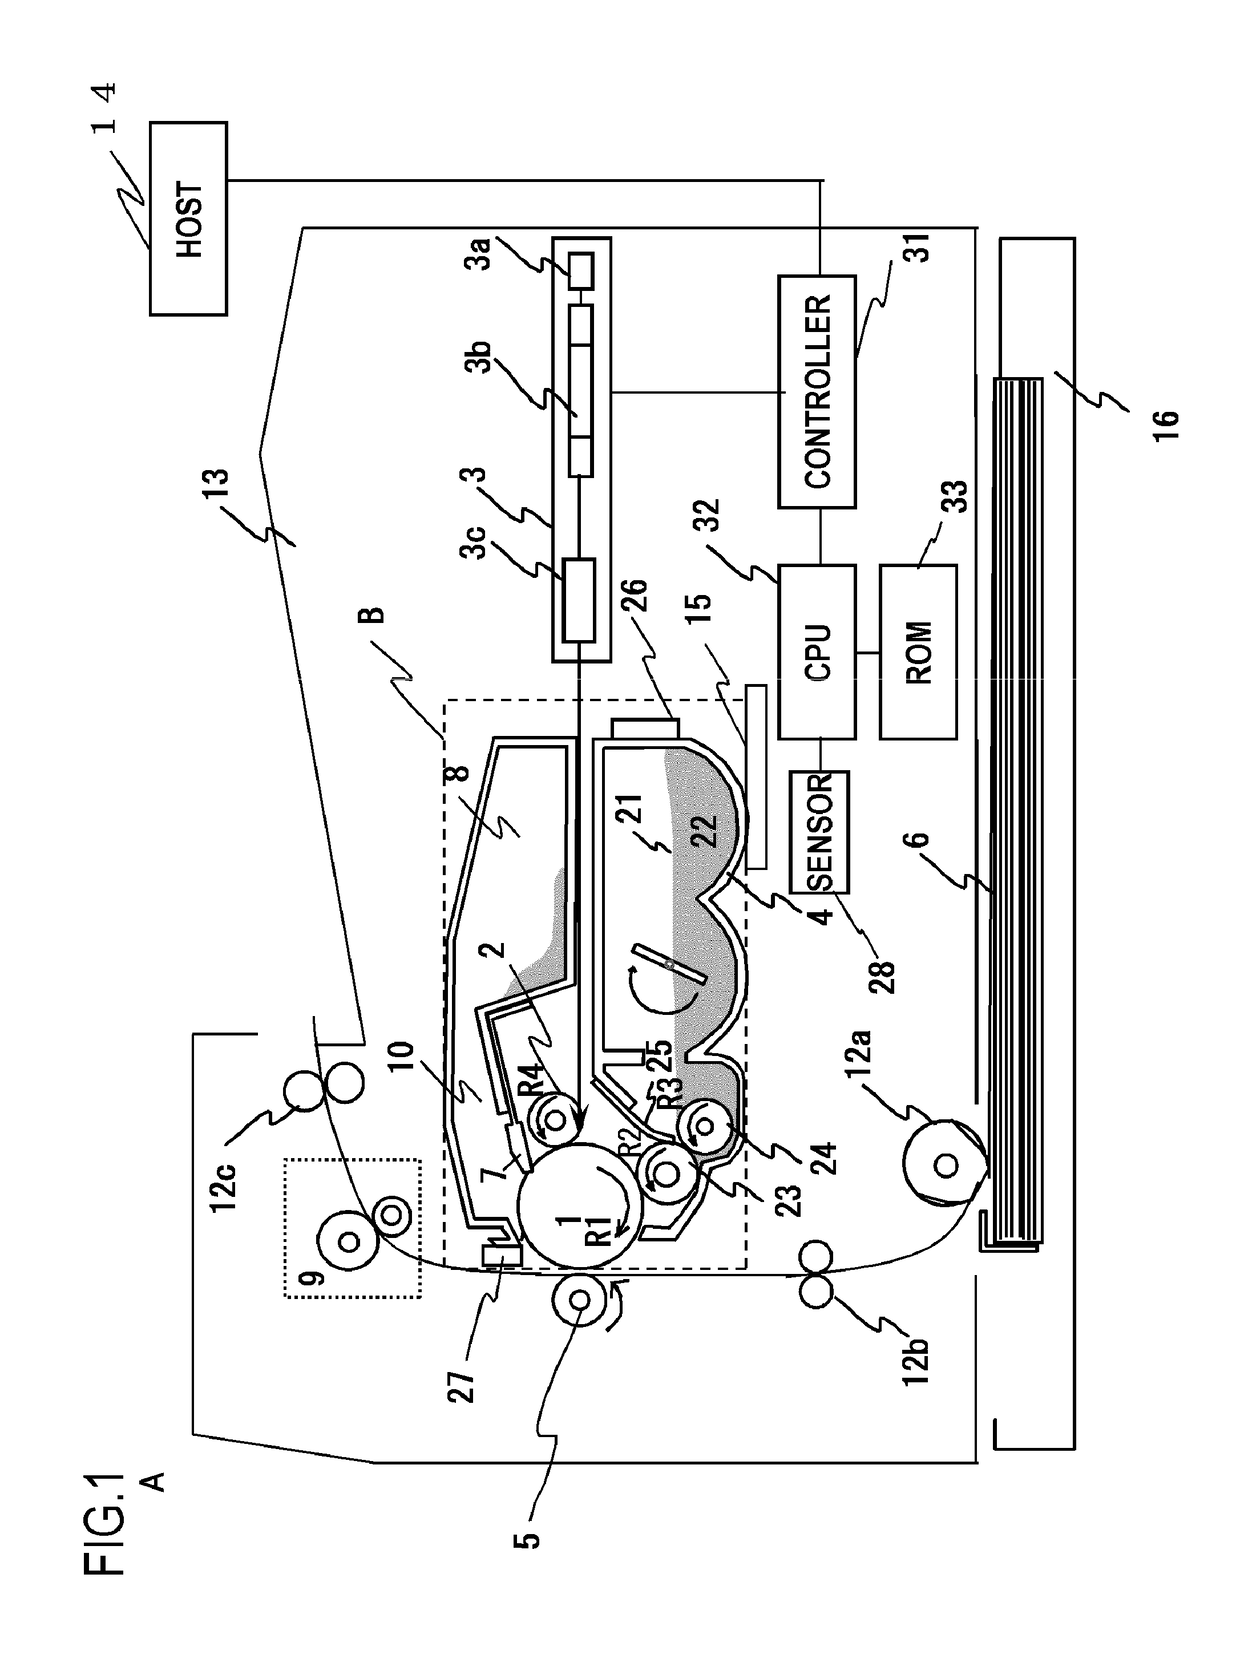 Image forming apparatus for preventing abnormally discharged image